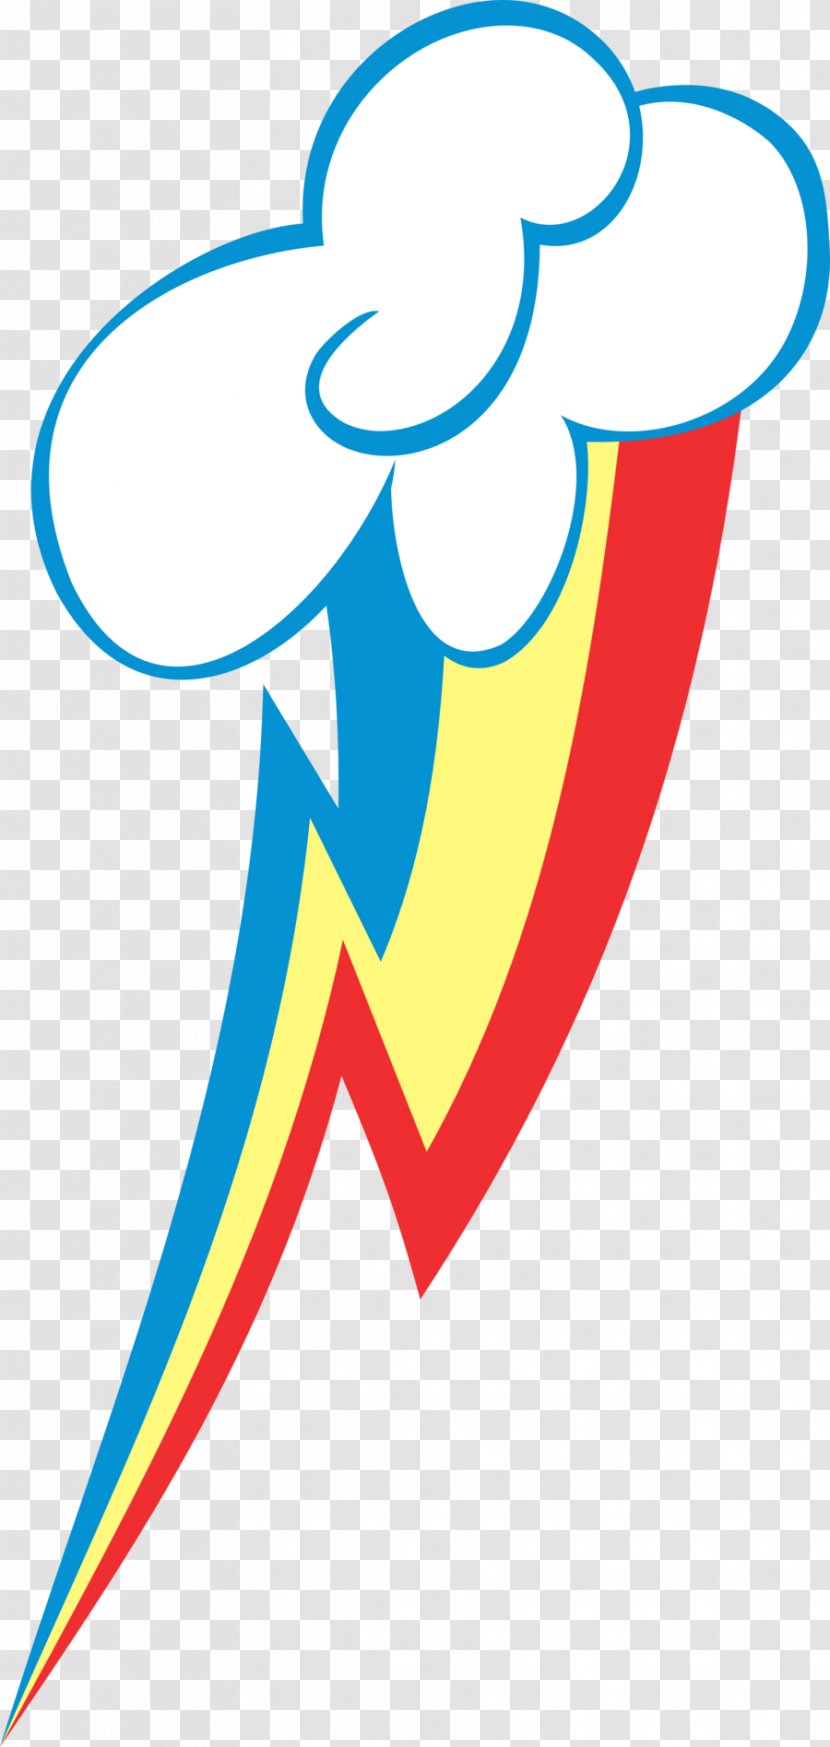 Rainbow Dash Rarity Cutie Mark Crusaders My Little Pony - Point - Dashed Vector Transparent PNG